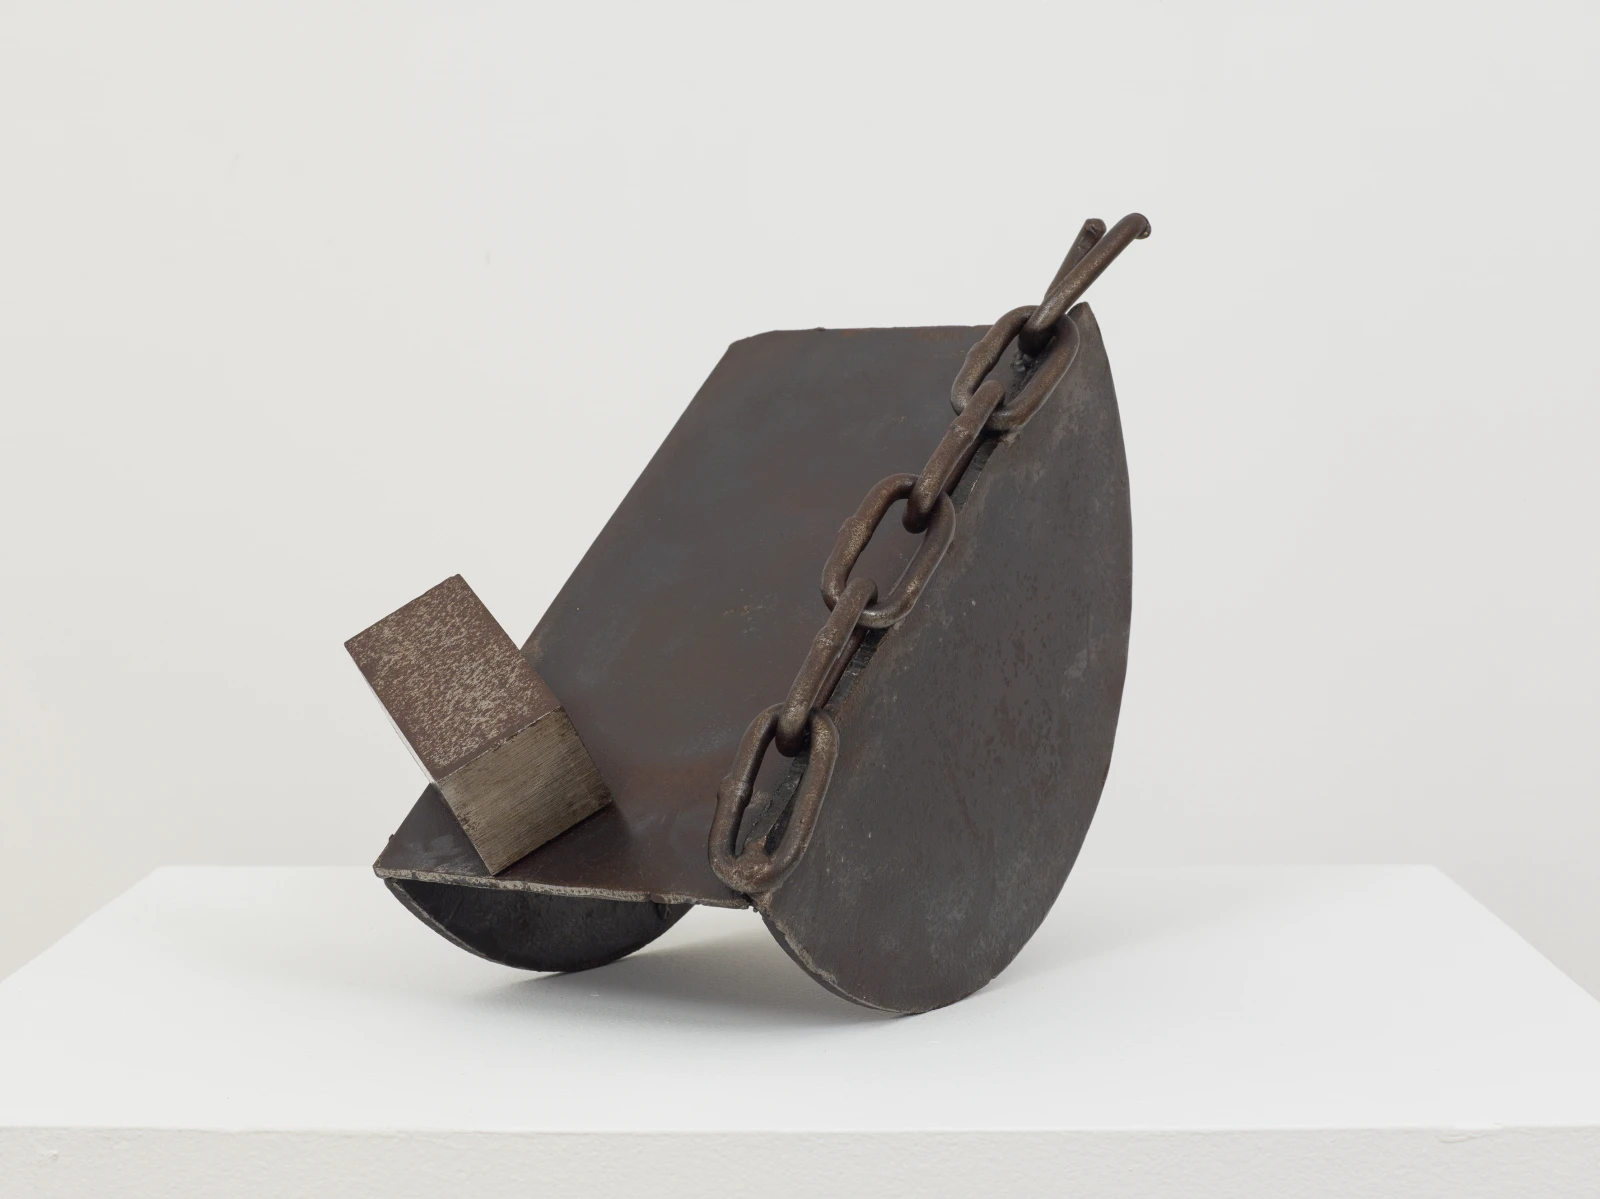 <div class="additional_caption">'Maquette for Before Words', 1990-1991</div>